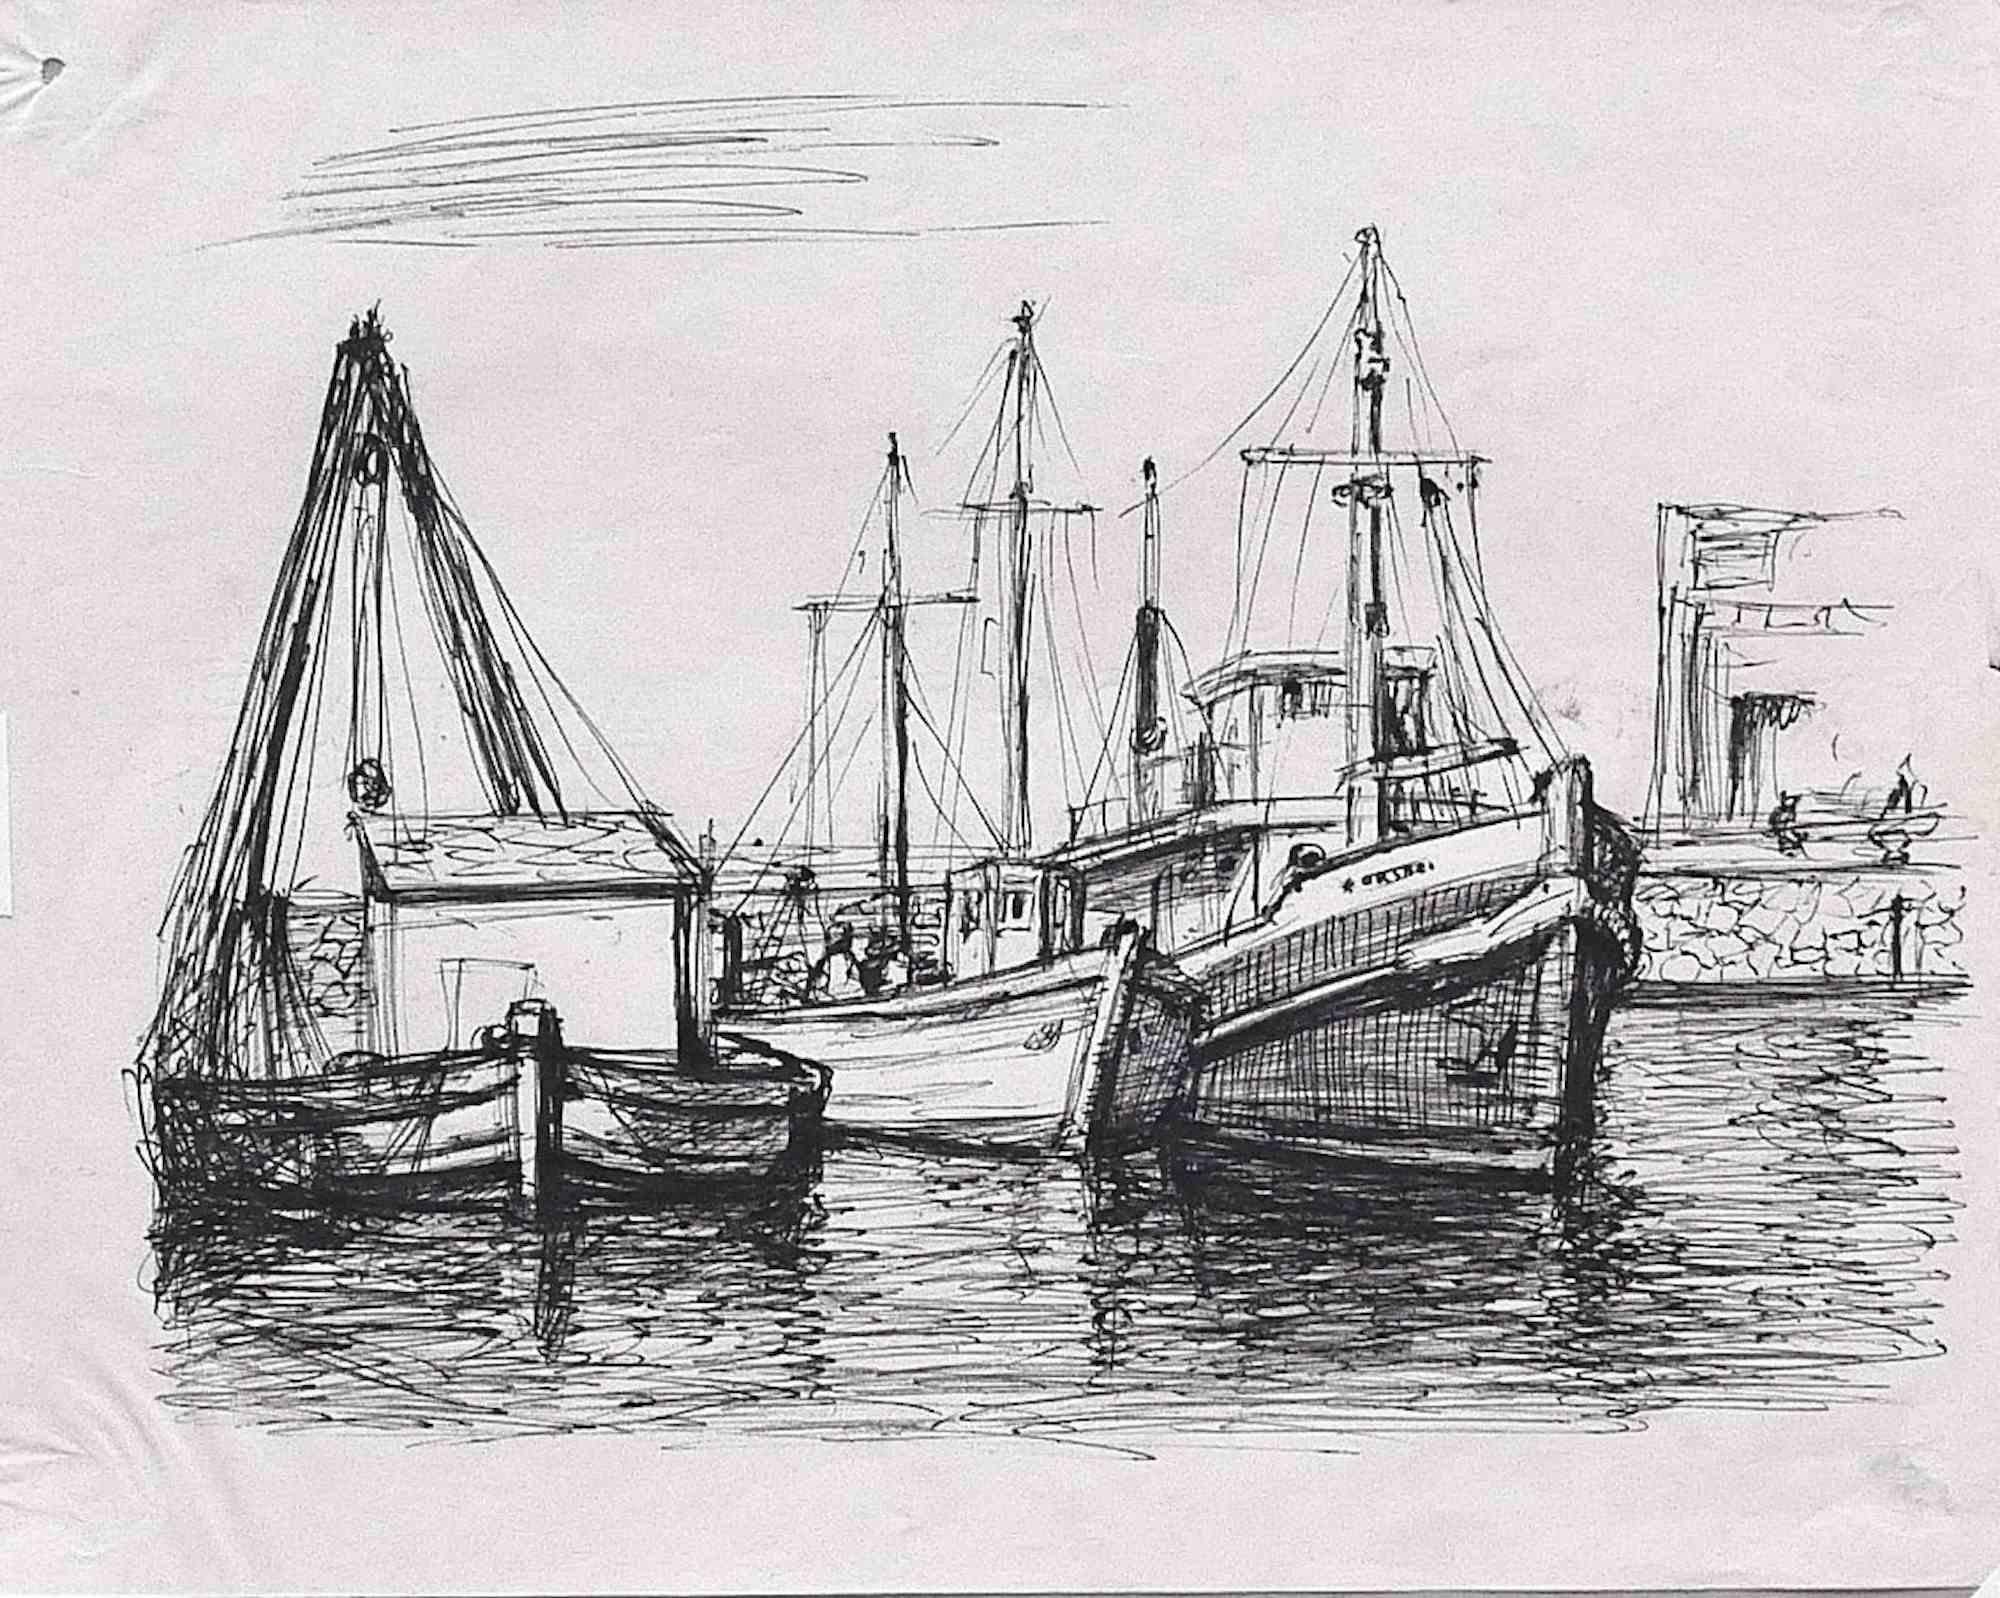 Unknown Figurative Art - Harbor View - Original Drawing  - Early 20th Century